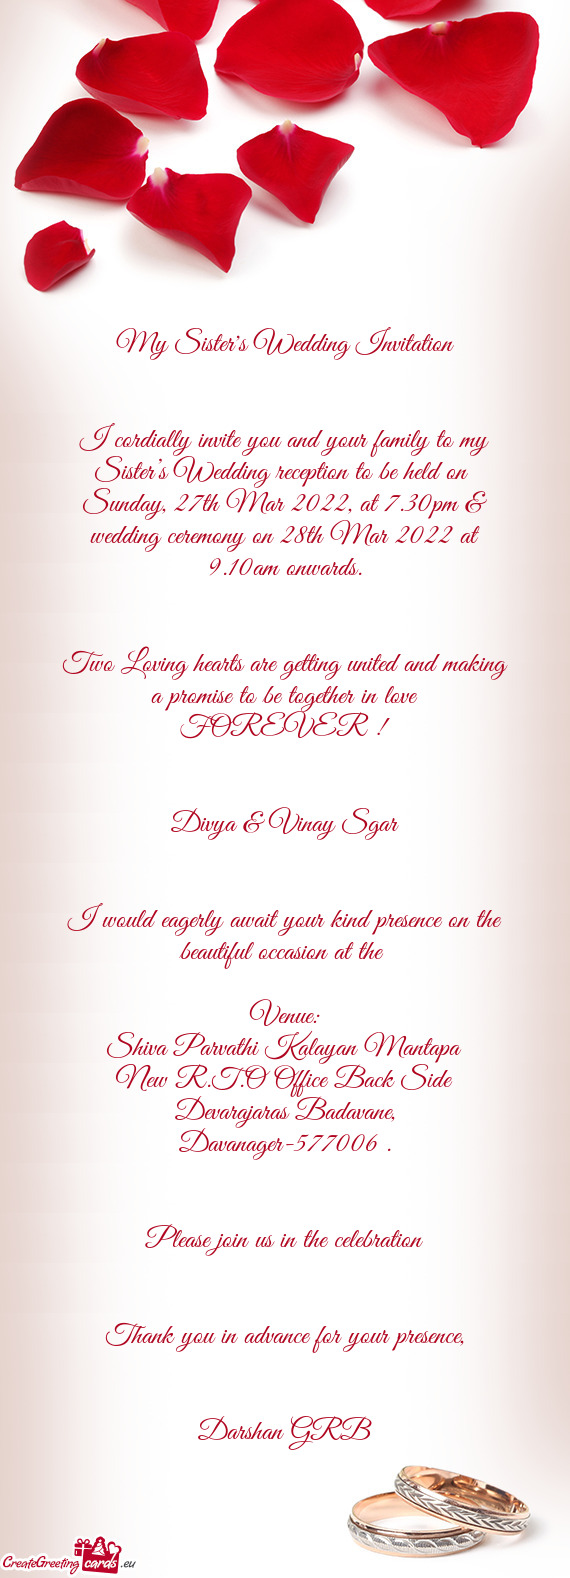 Sunday, 27th Mar 2022, at 7.30pm & wedding ceremony on 28th Mar 2022 at 9.10am onwards